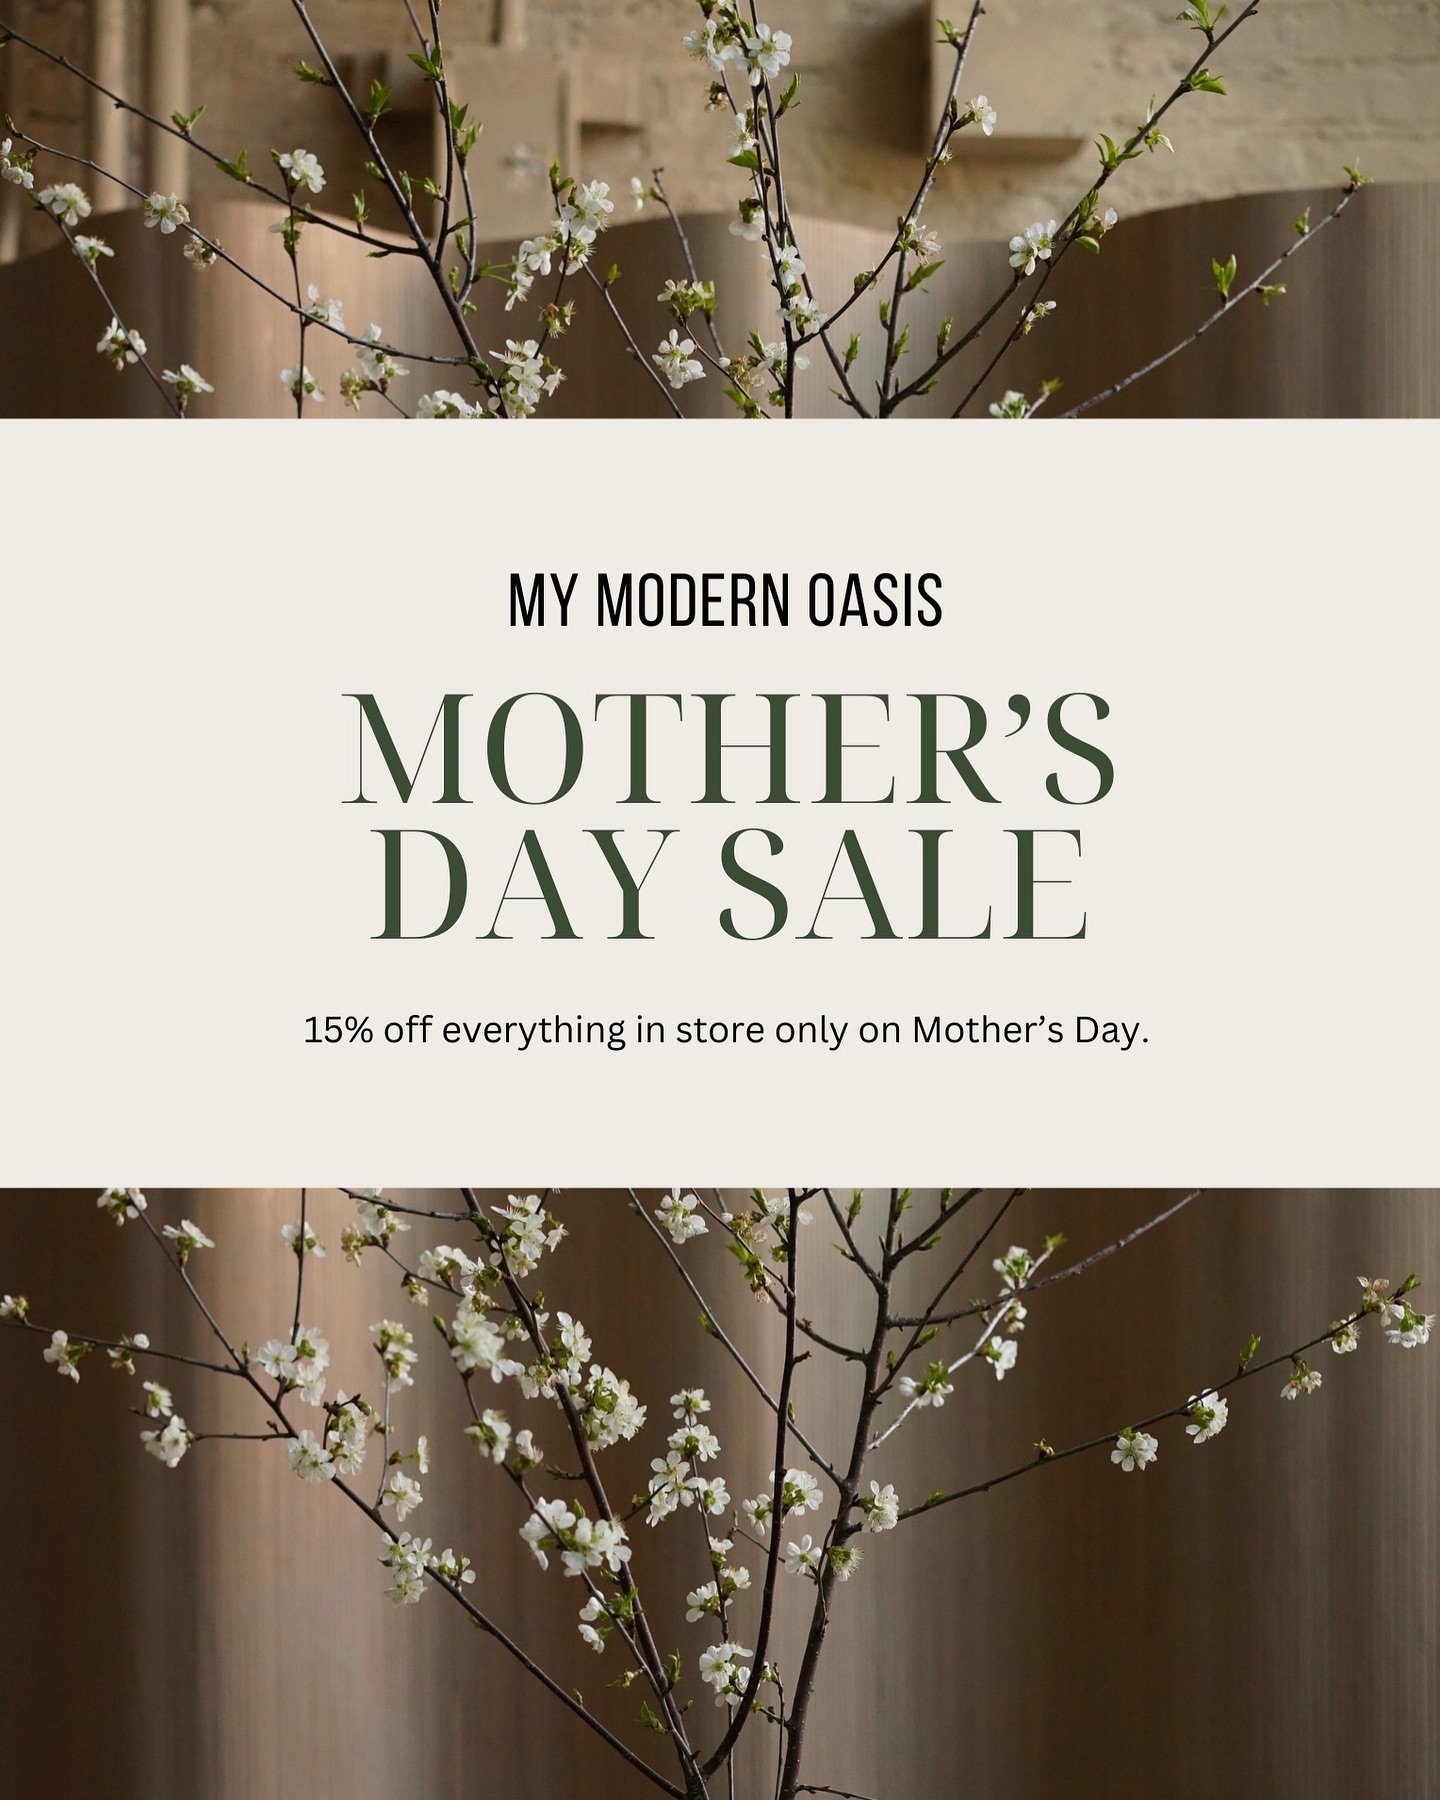 Join us this Sunday for a last minute Mother&rsquo;s Day sale. We appreciate all the hard working mothers out there! We will be offering 15% off everything and you don&rsquo;t even have to be a mother! Everyone is welcome to treat themselves this Sun